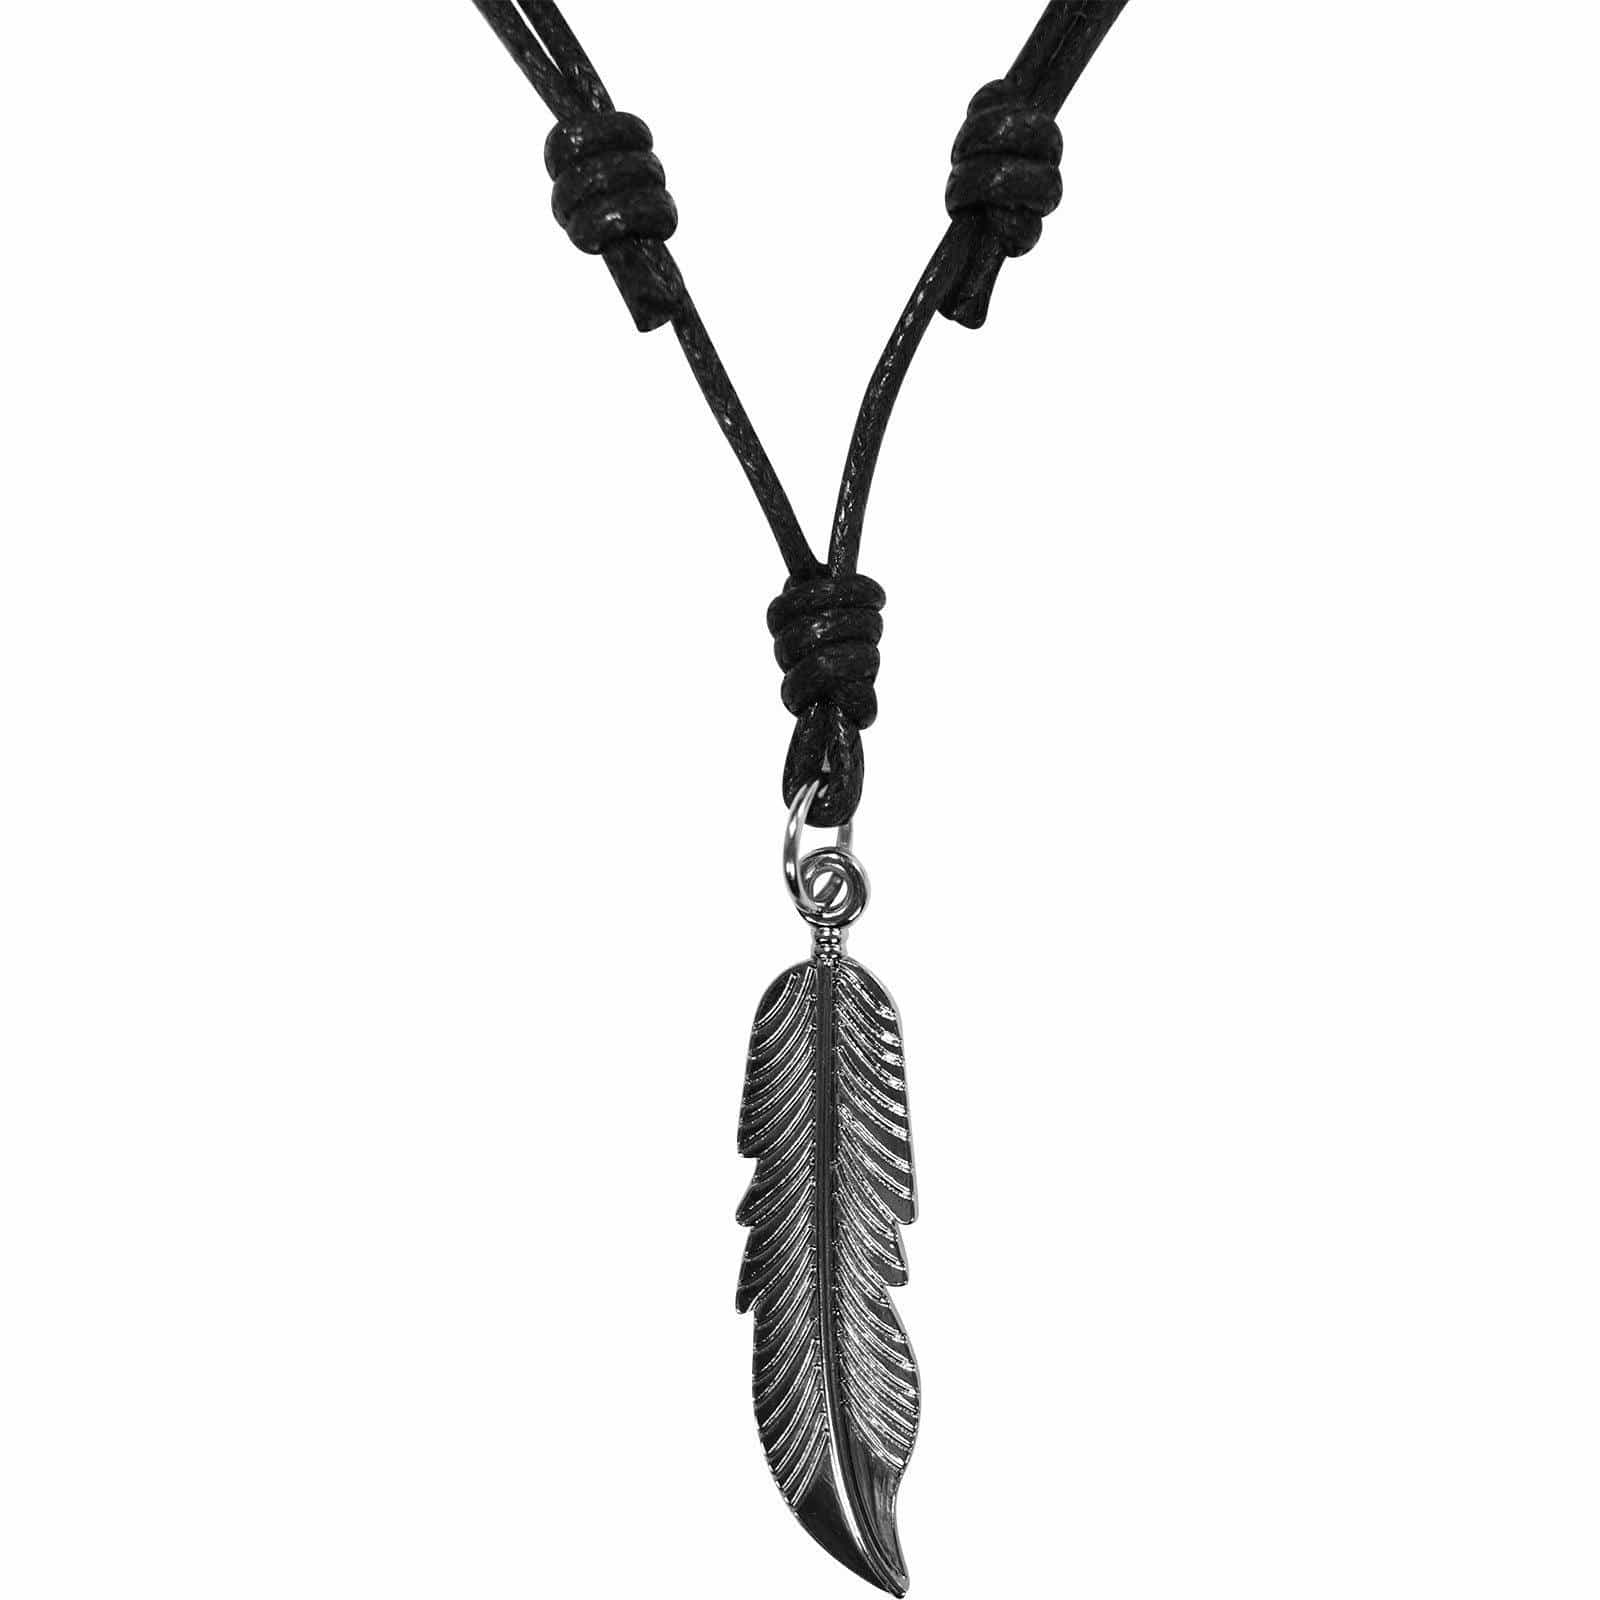 Feather Pendant Chain Necklace Mens Womens Girls Boys Childrens Ladies Jewellery